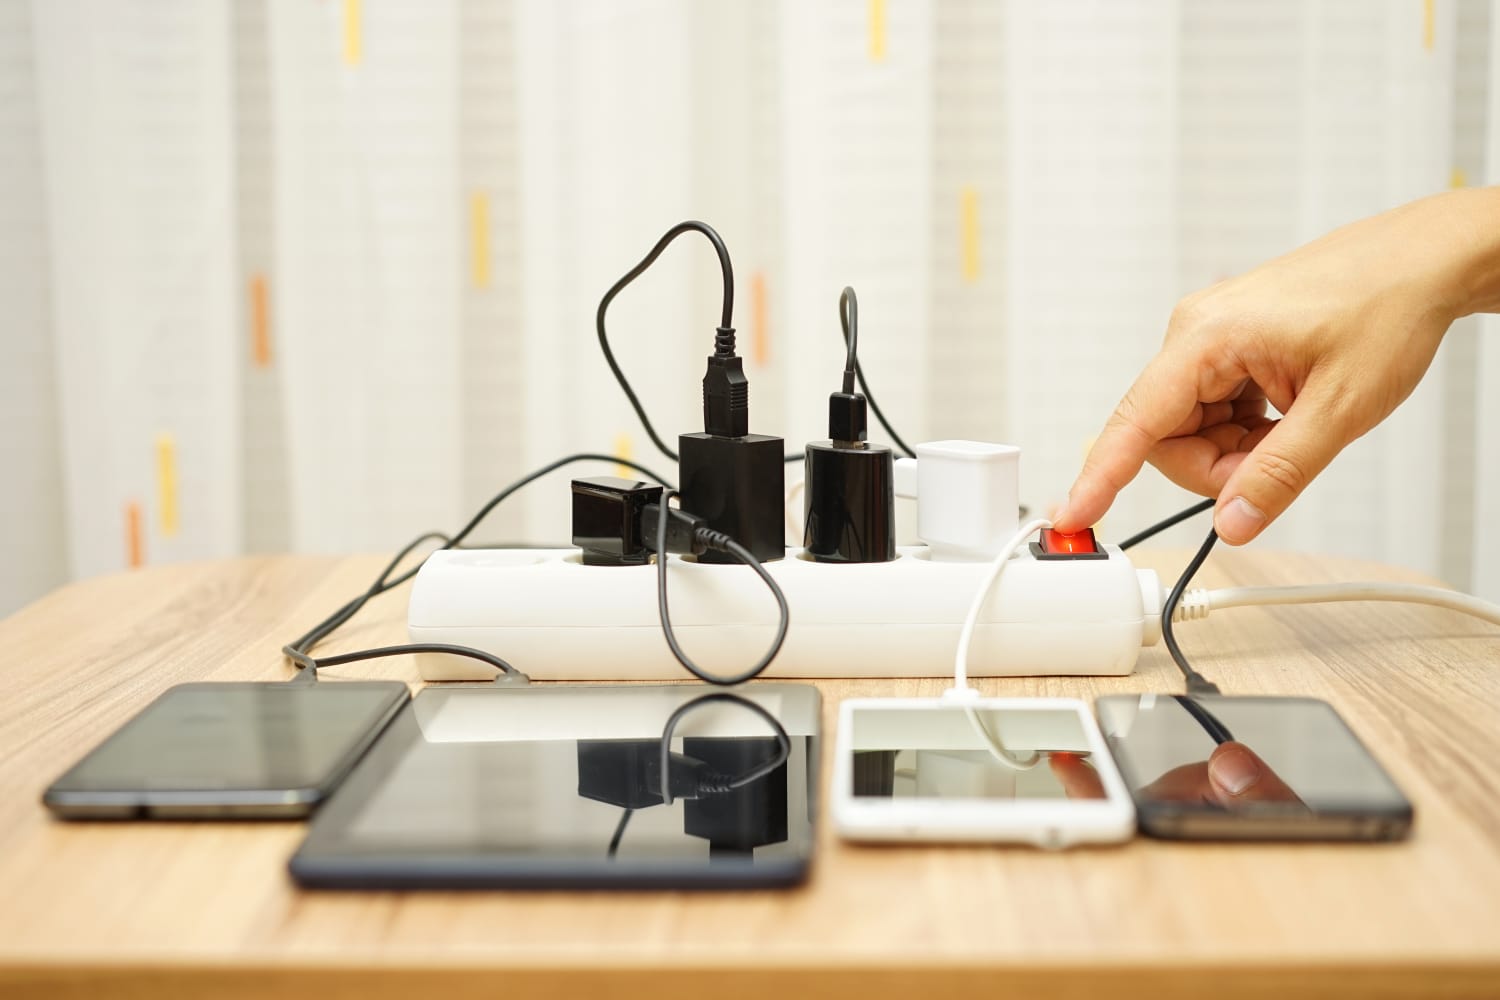 Cord Clutter Is Real! 4 Smart Ways to Get Organized in an Endless Sea of Chargers